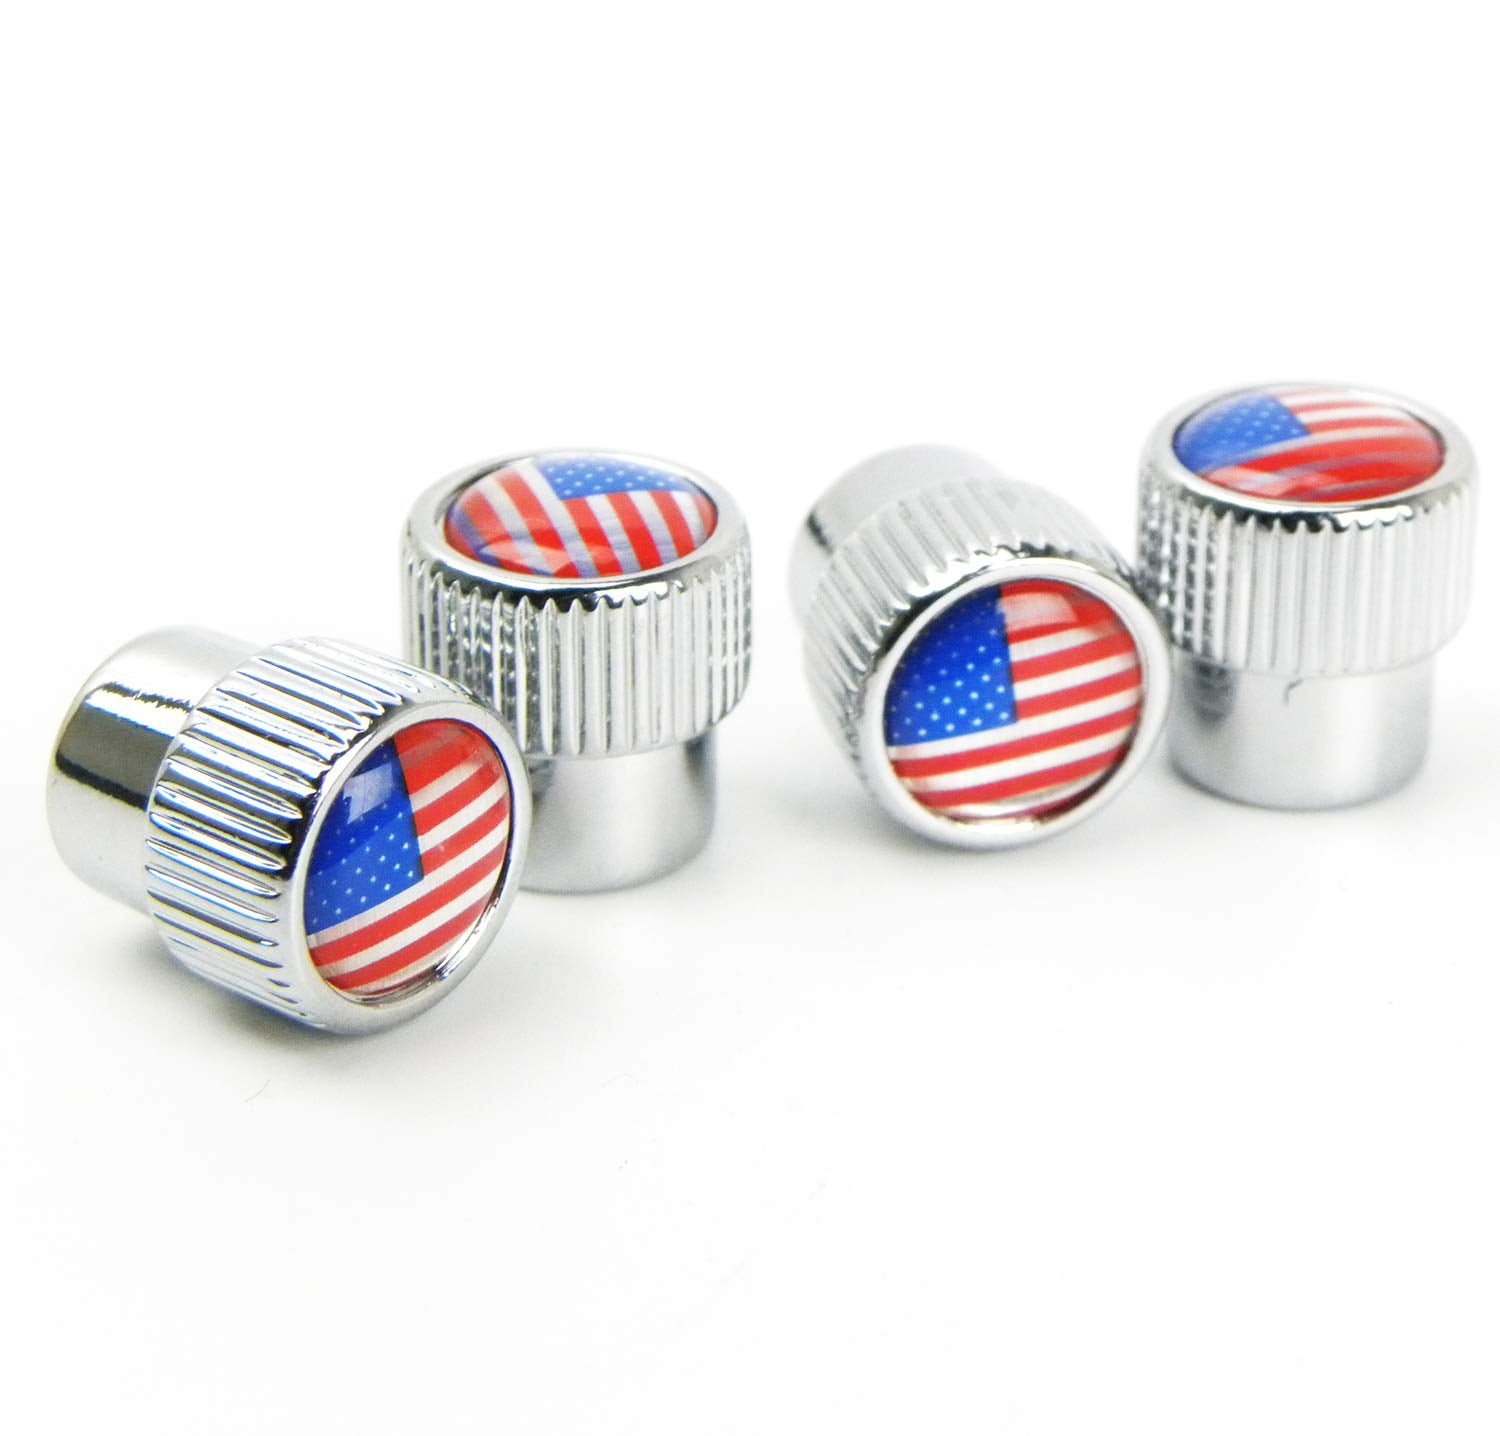 Motorcycles Vehicles Car Accessories Bicycles Tire Valve Stem Cap for Car Black Trucks 4 Pack American Flag Pattern Anti-Rust Airtight Universal Valve Stem Covers for Cars 